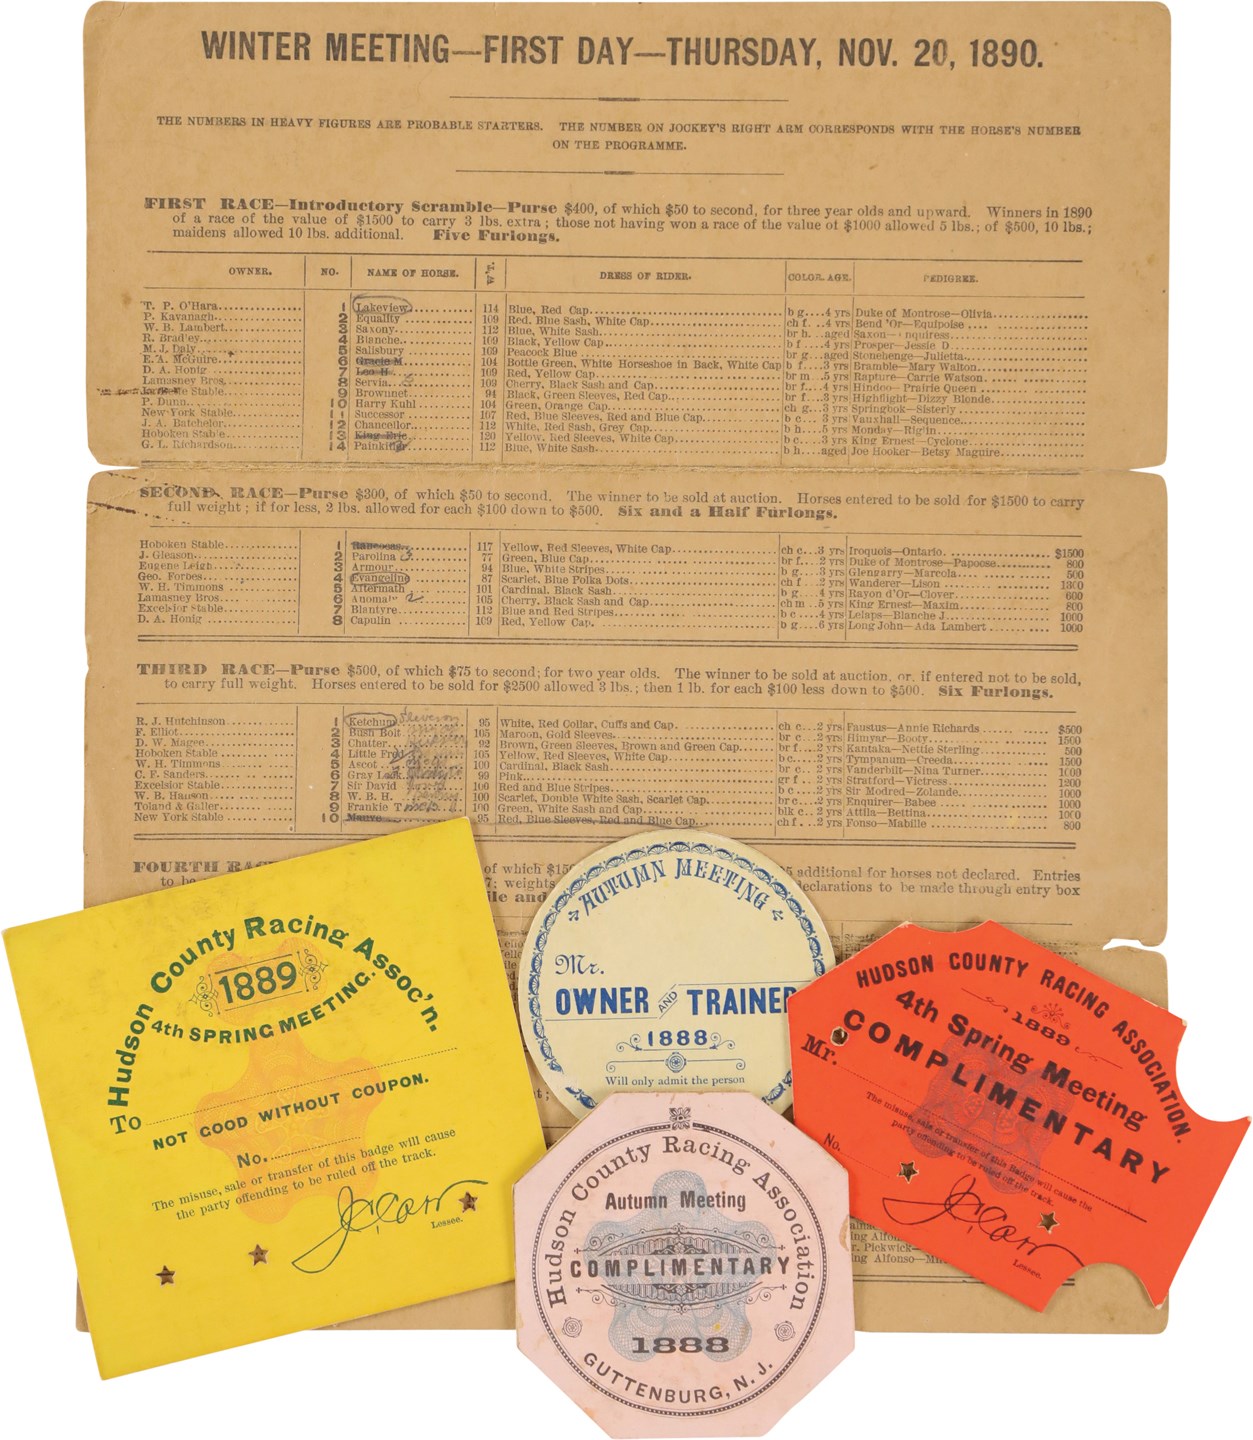 Horse Racing - Program and Badges from the Most Crooked Racetrack in America (5)